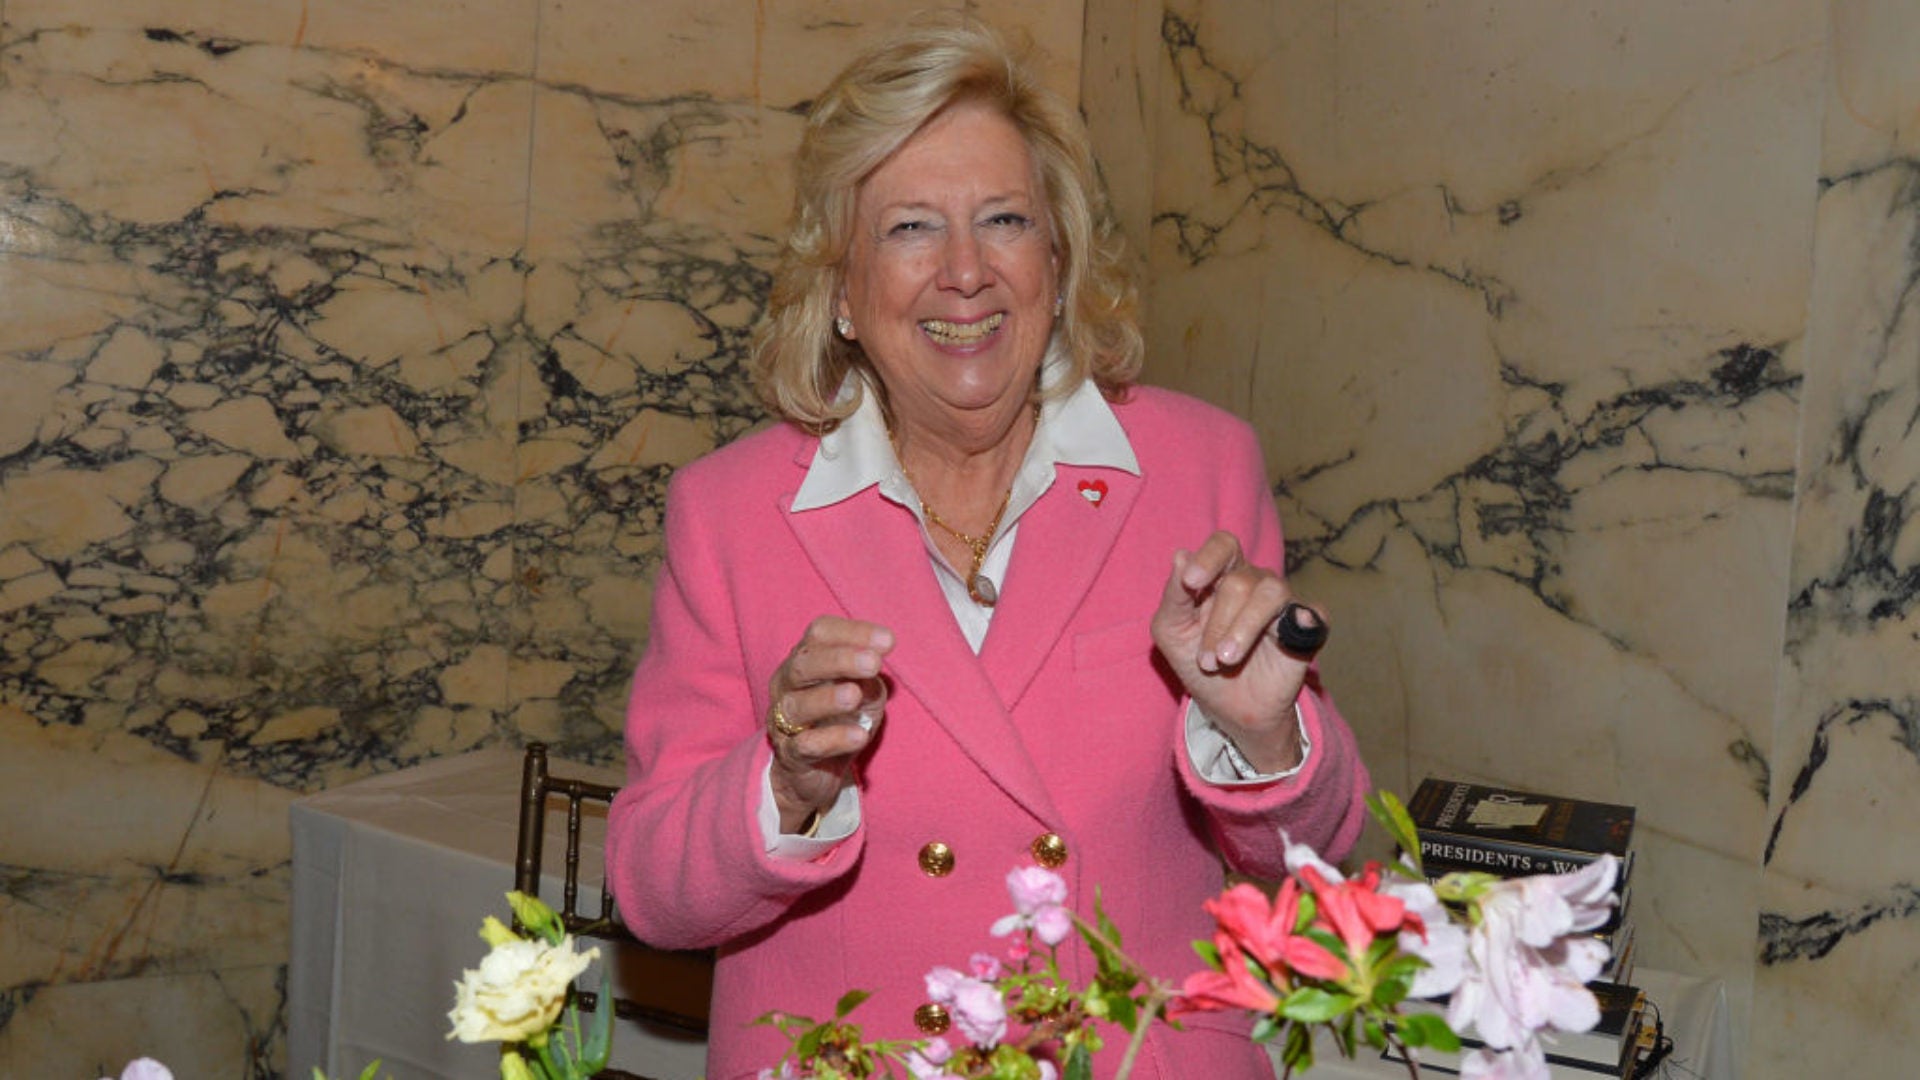 Central Park Five Prosecutor Linda Fairstein Tried To Negotiate Her Involvement In When They